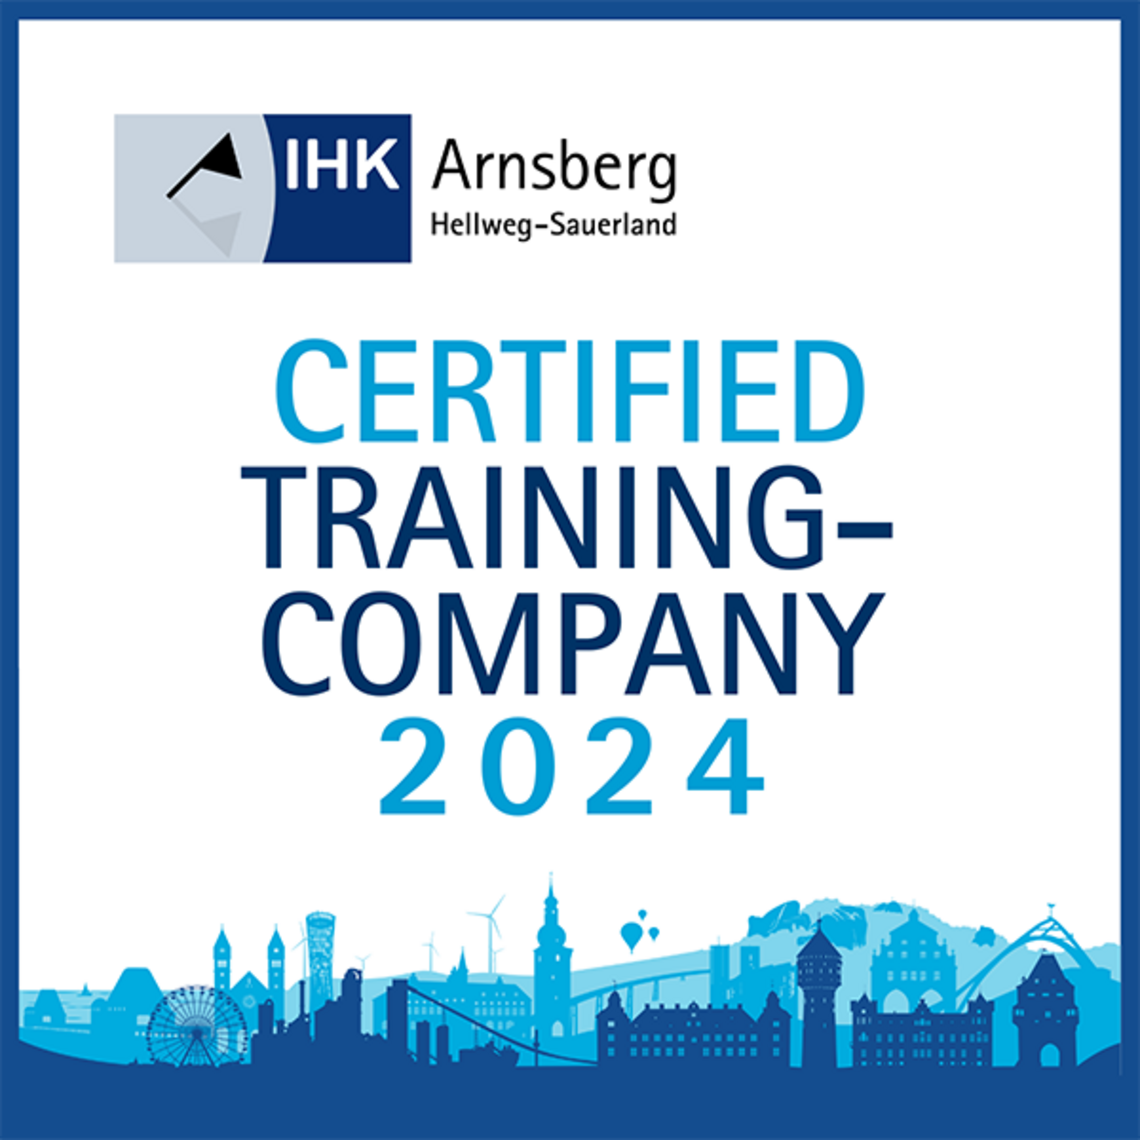 Tecnamic is a training company approved by the Arnsberg Chamber of Industry and Commerce